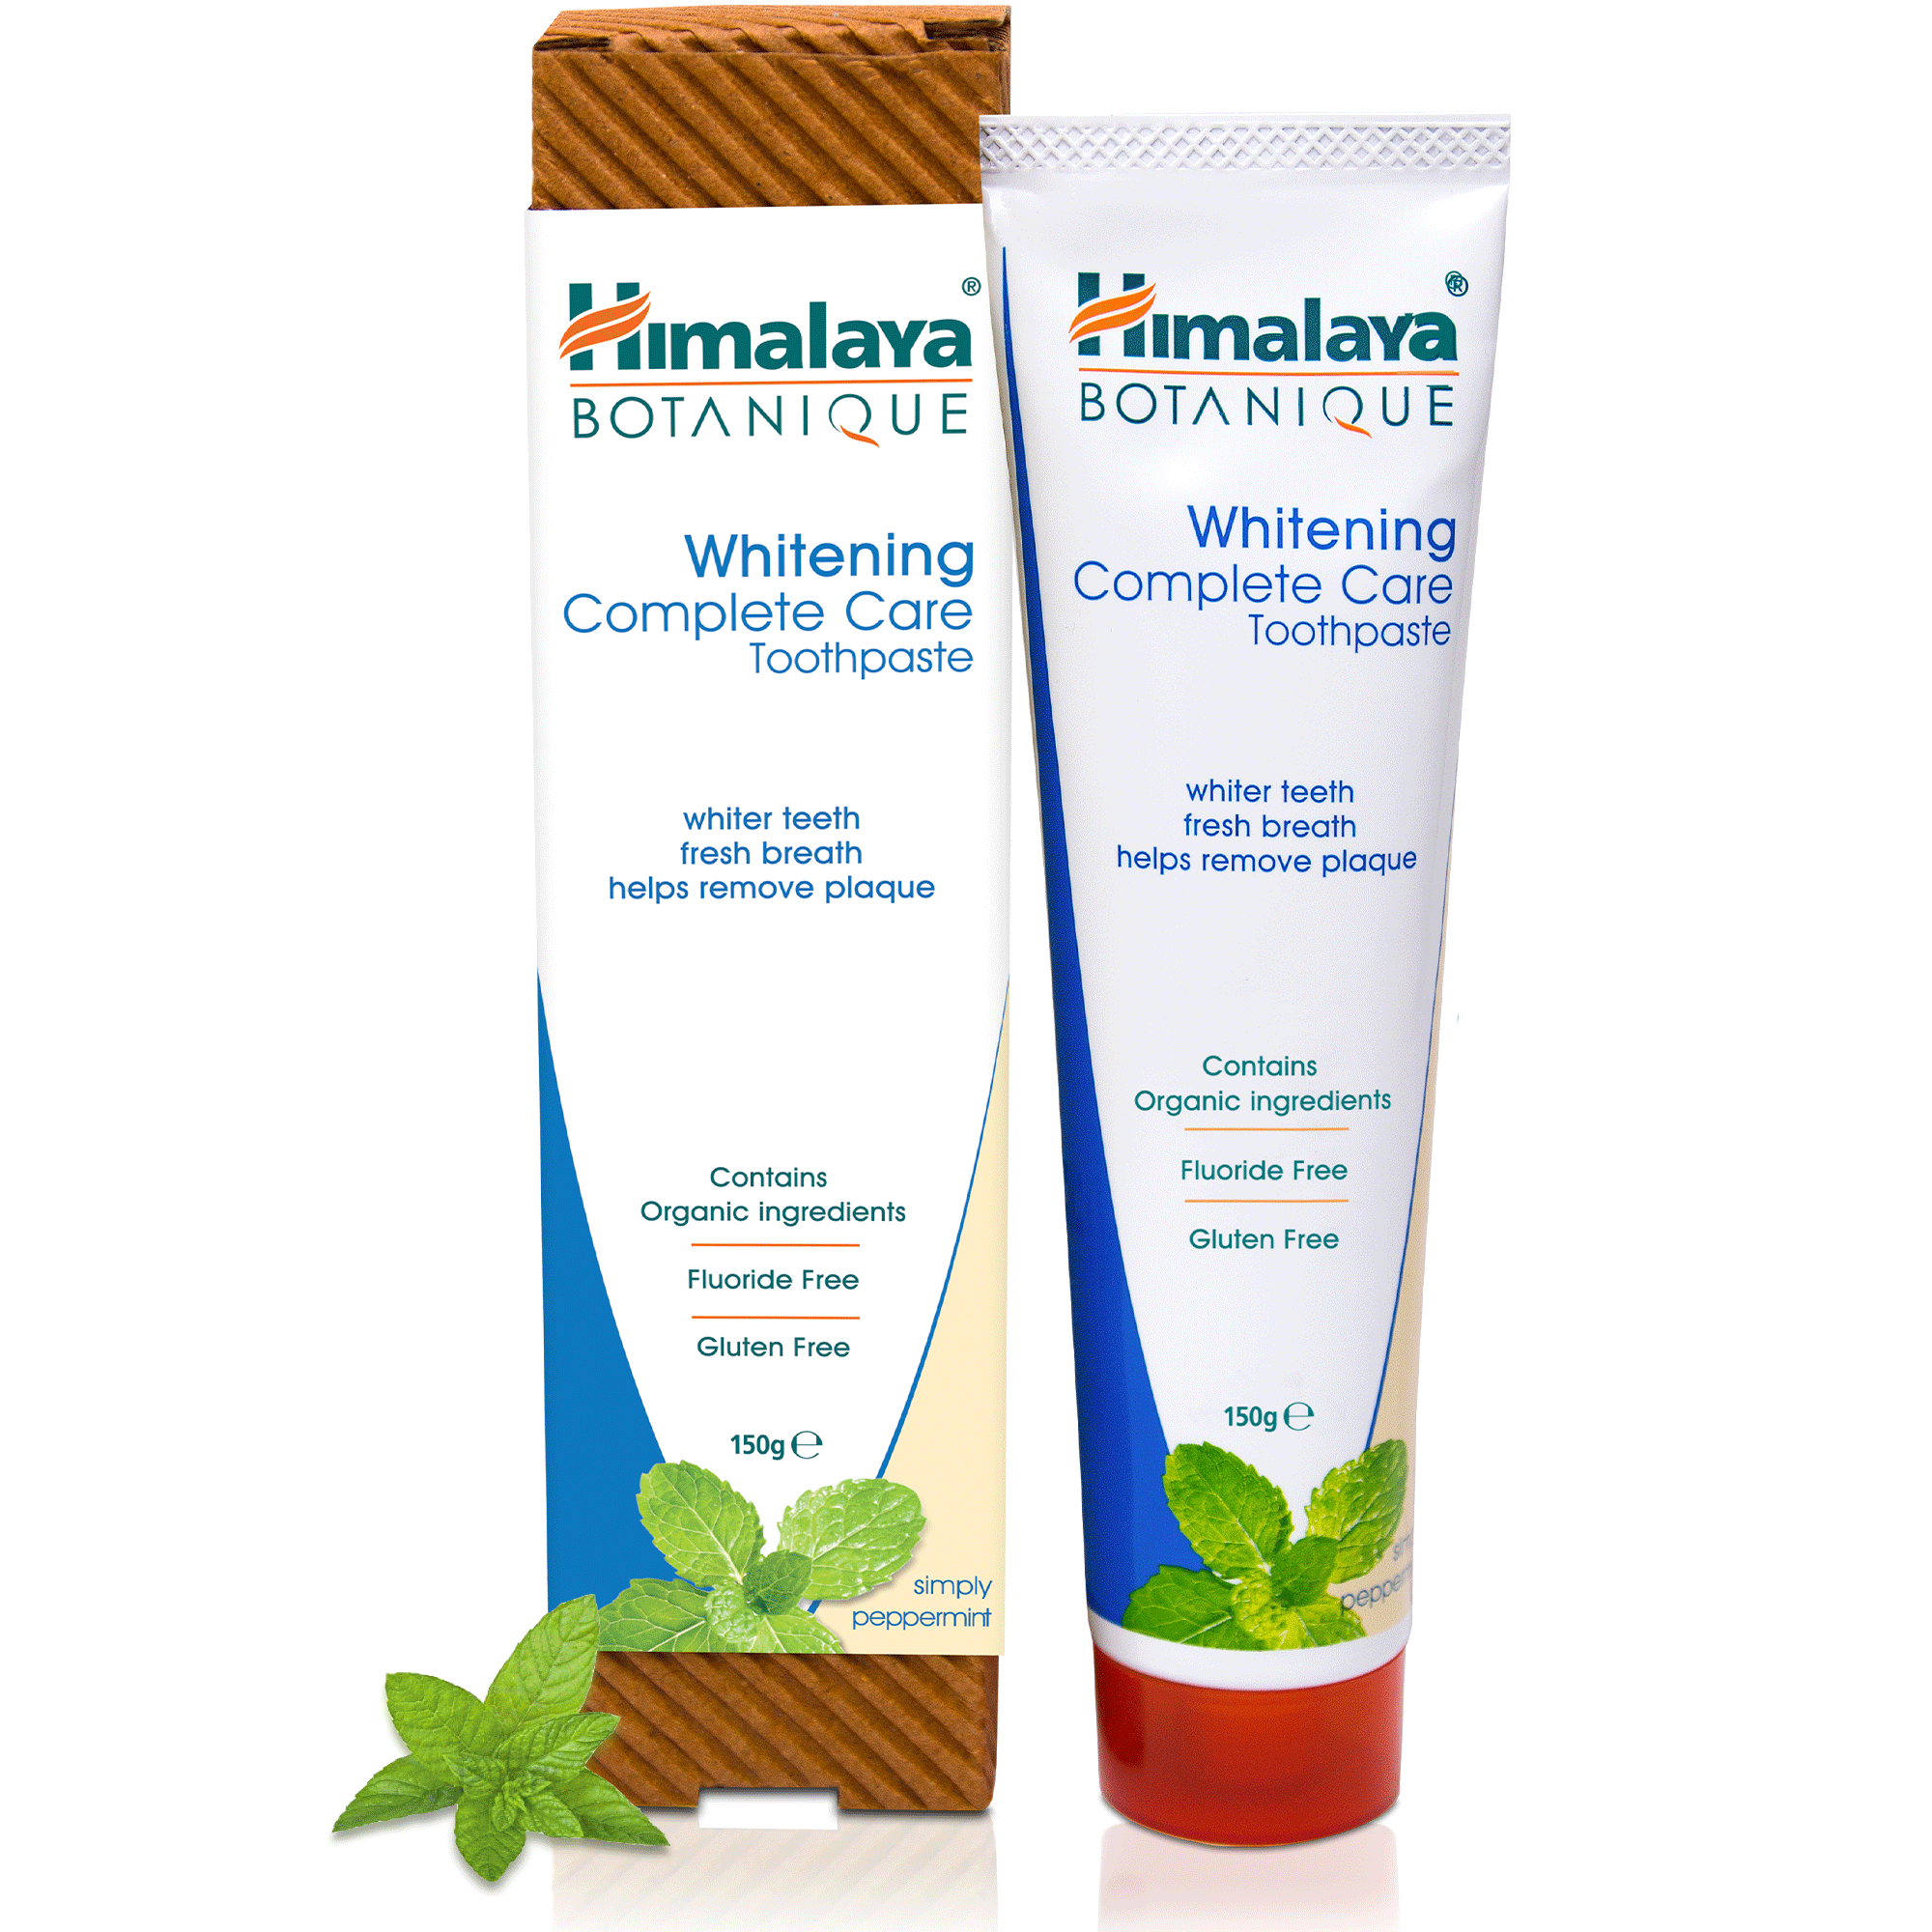 Himalaya BOTANIQUE Whitening Complete Care Toothpaste - Simply Peppermint